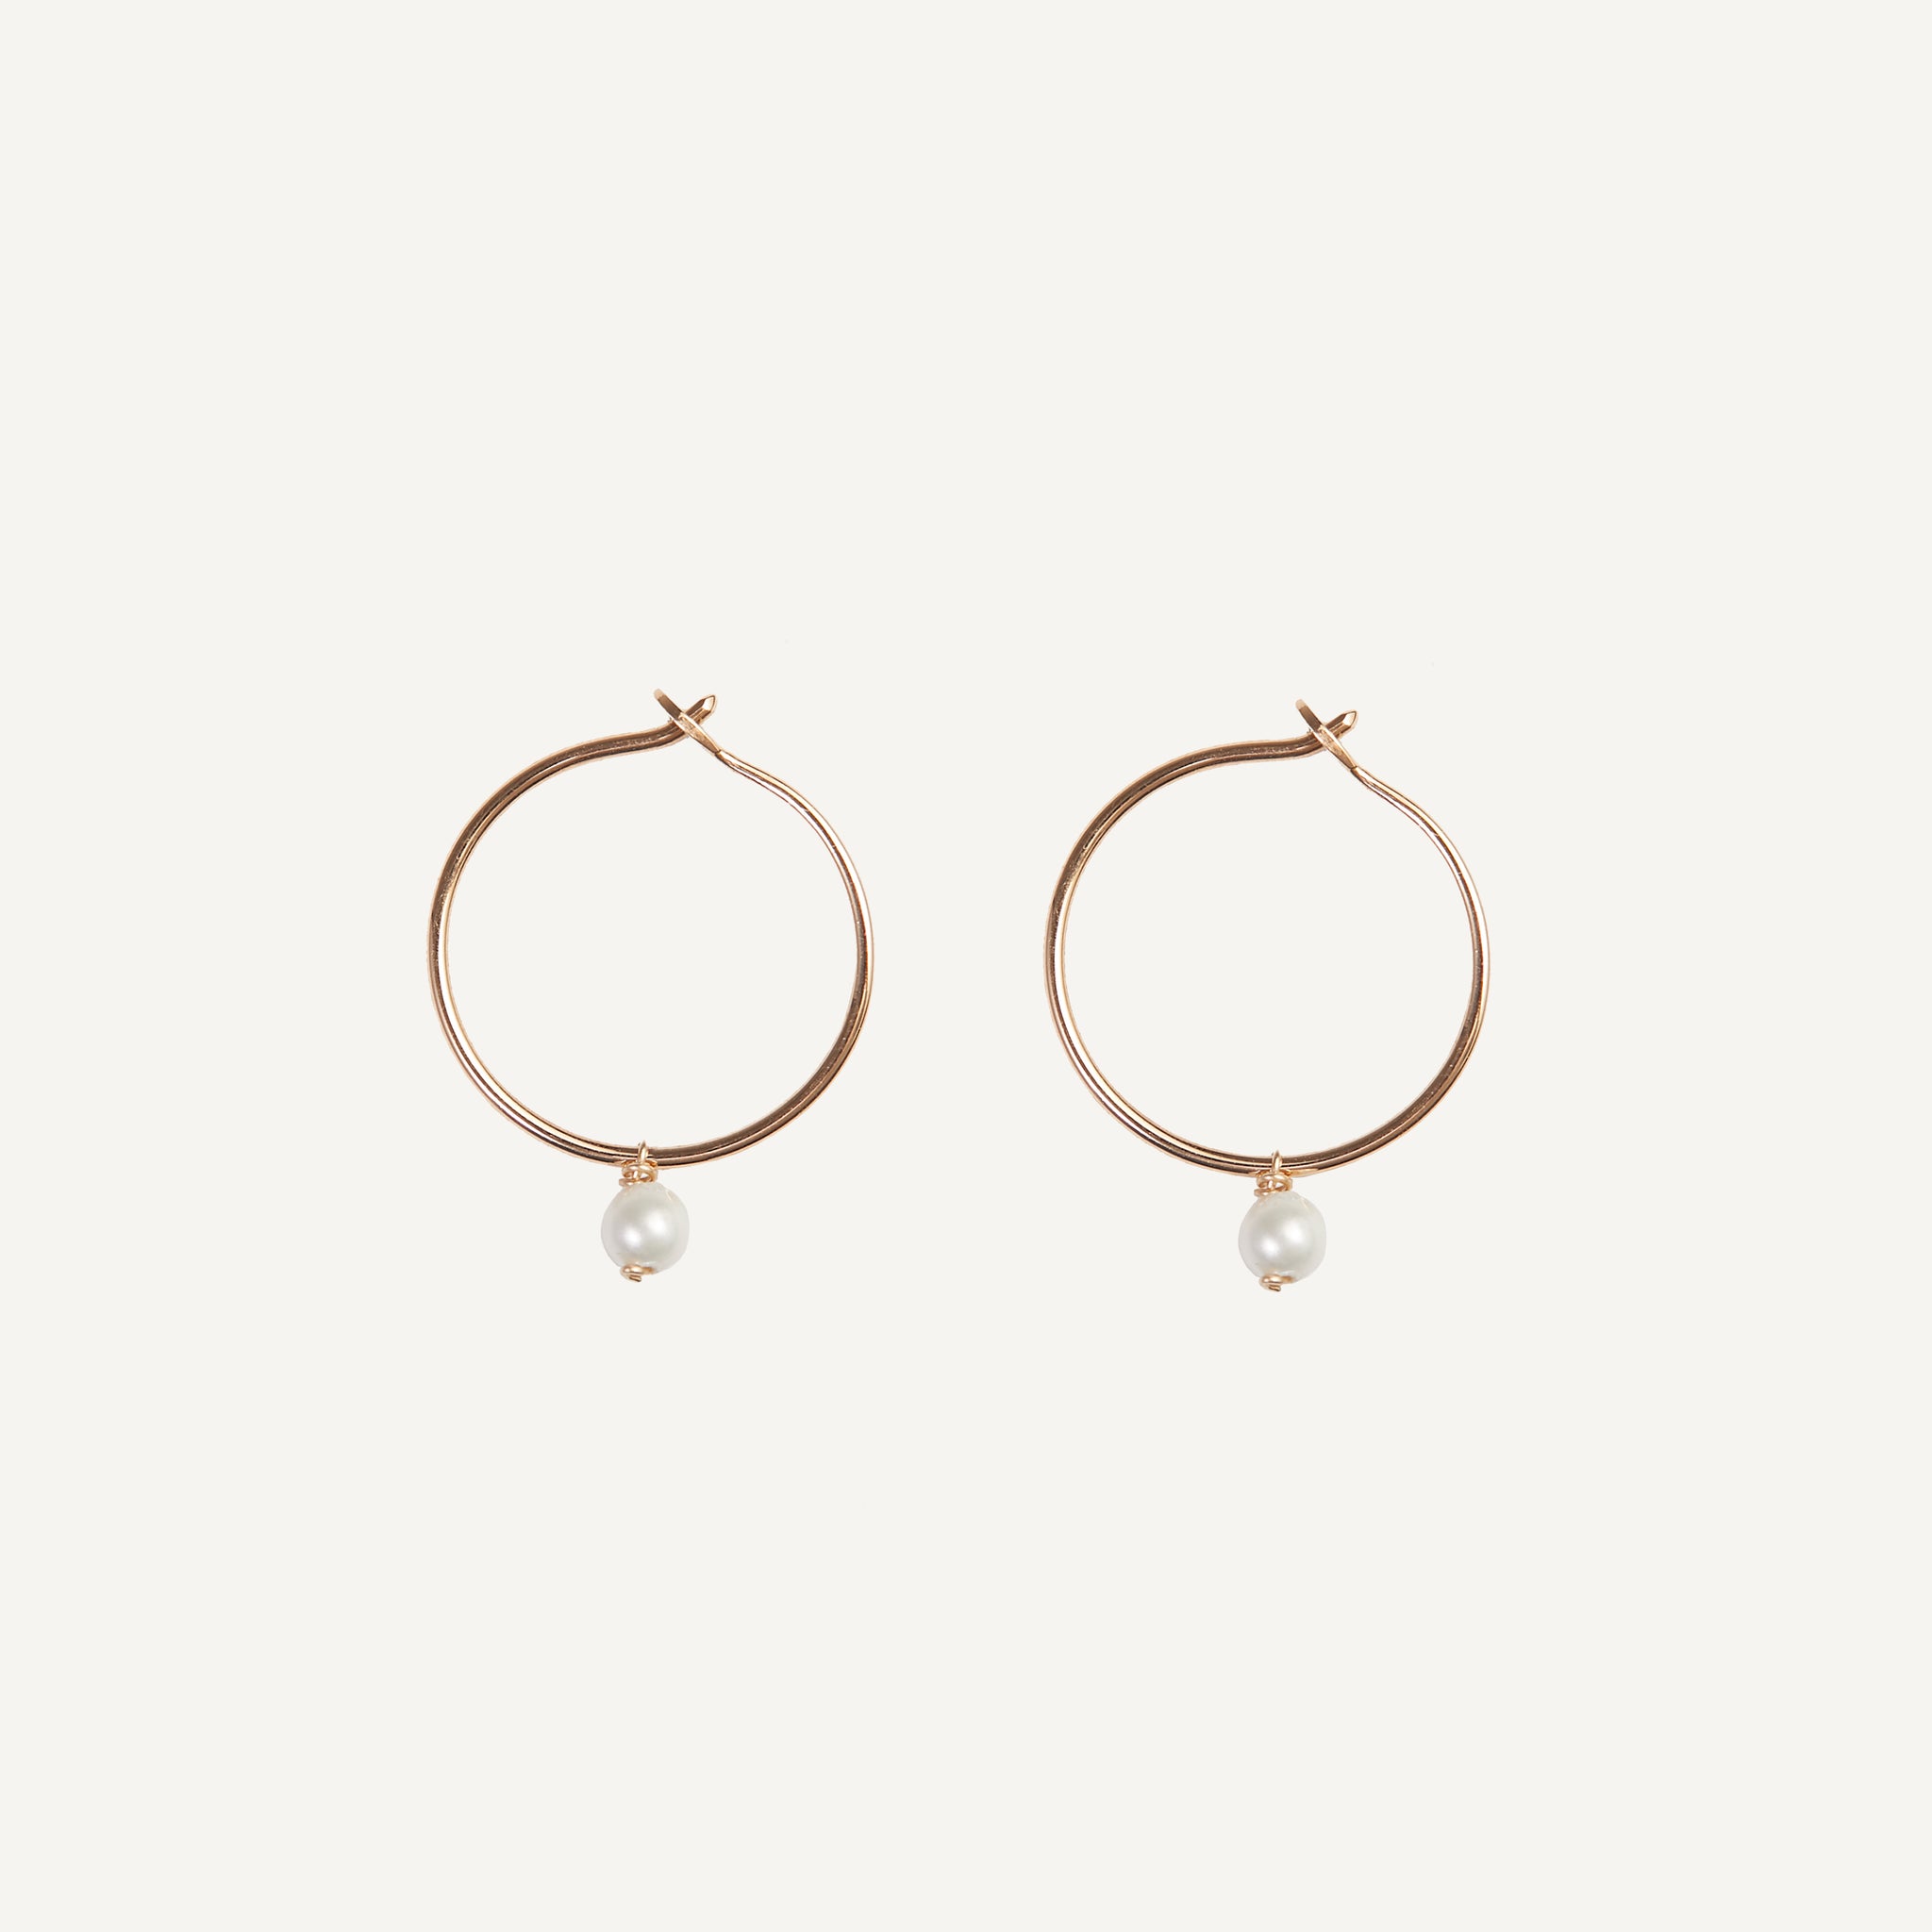 HELENA ROHNER 18K GOLD HOOPS WITH STONE BEAD